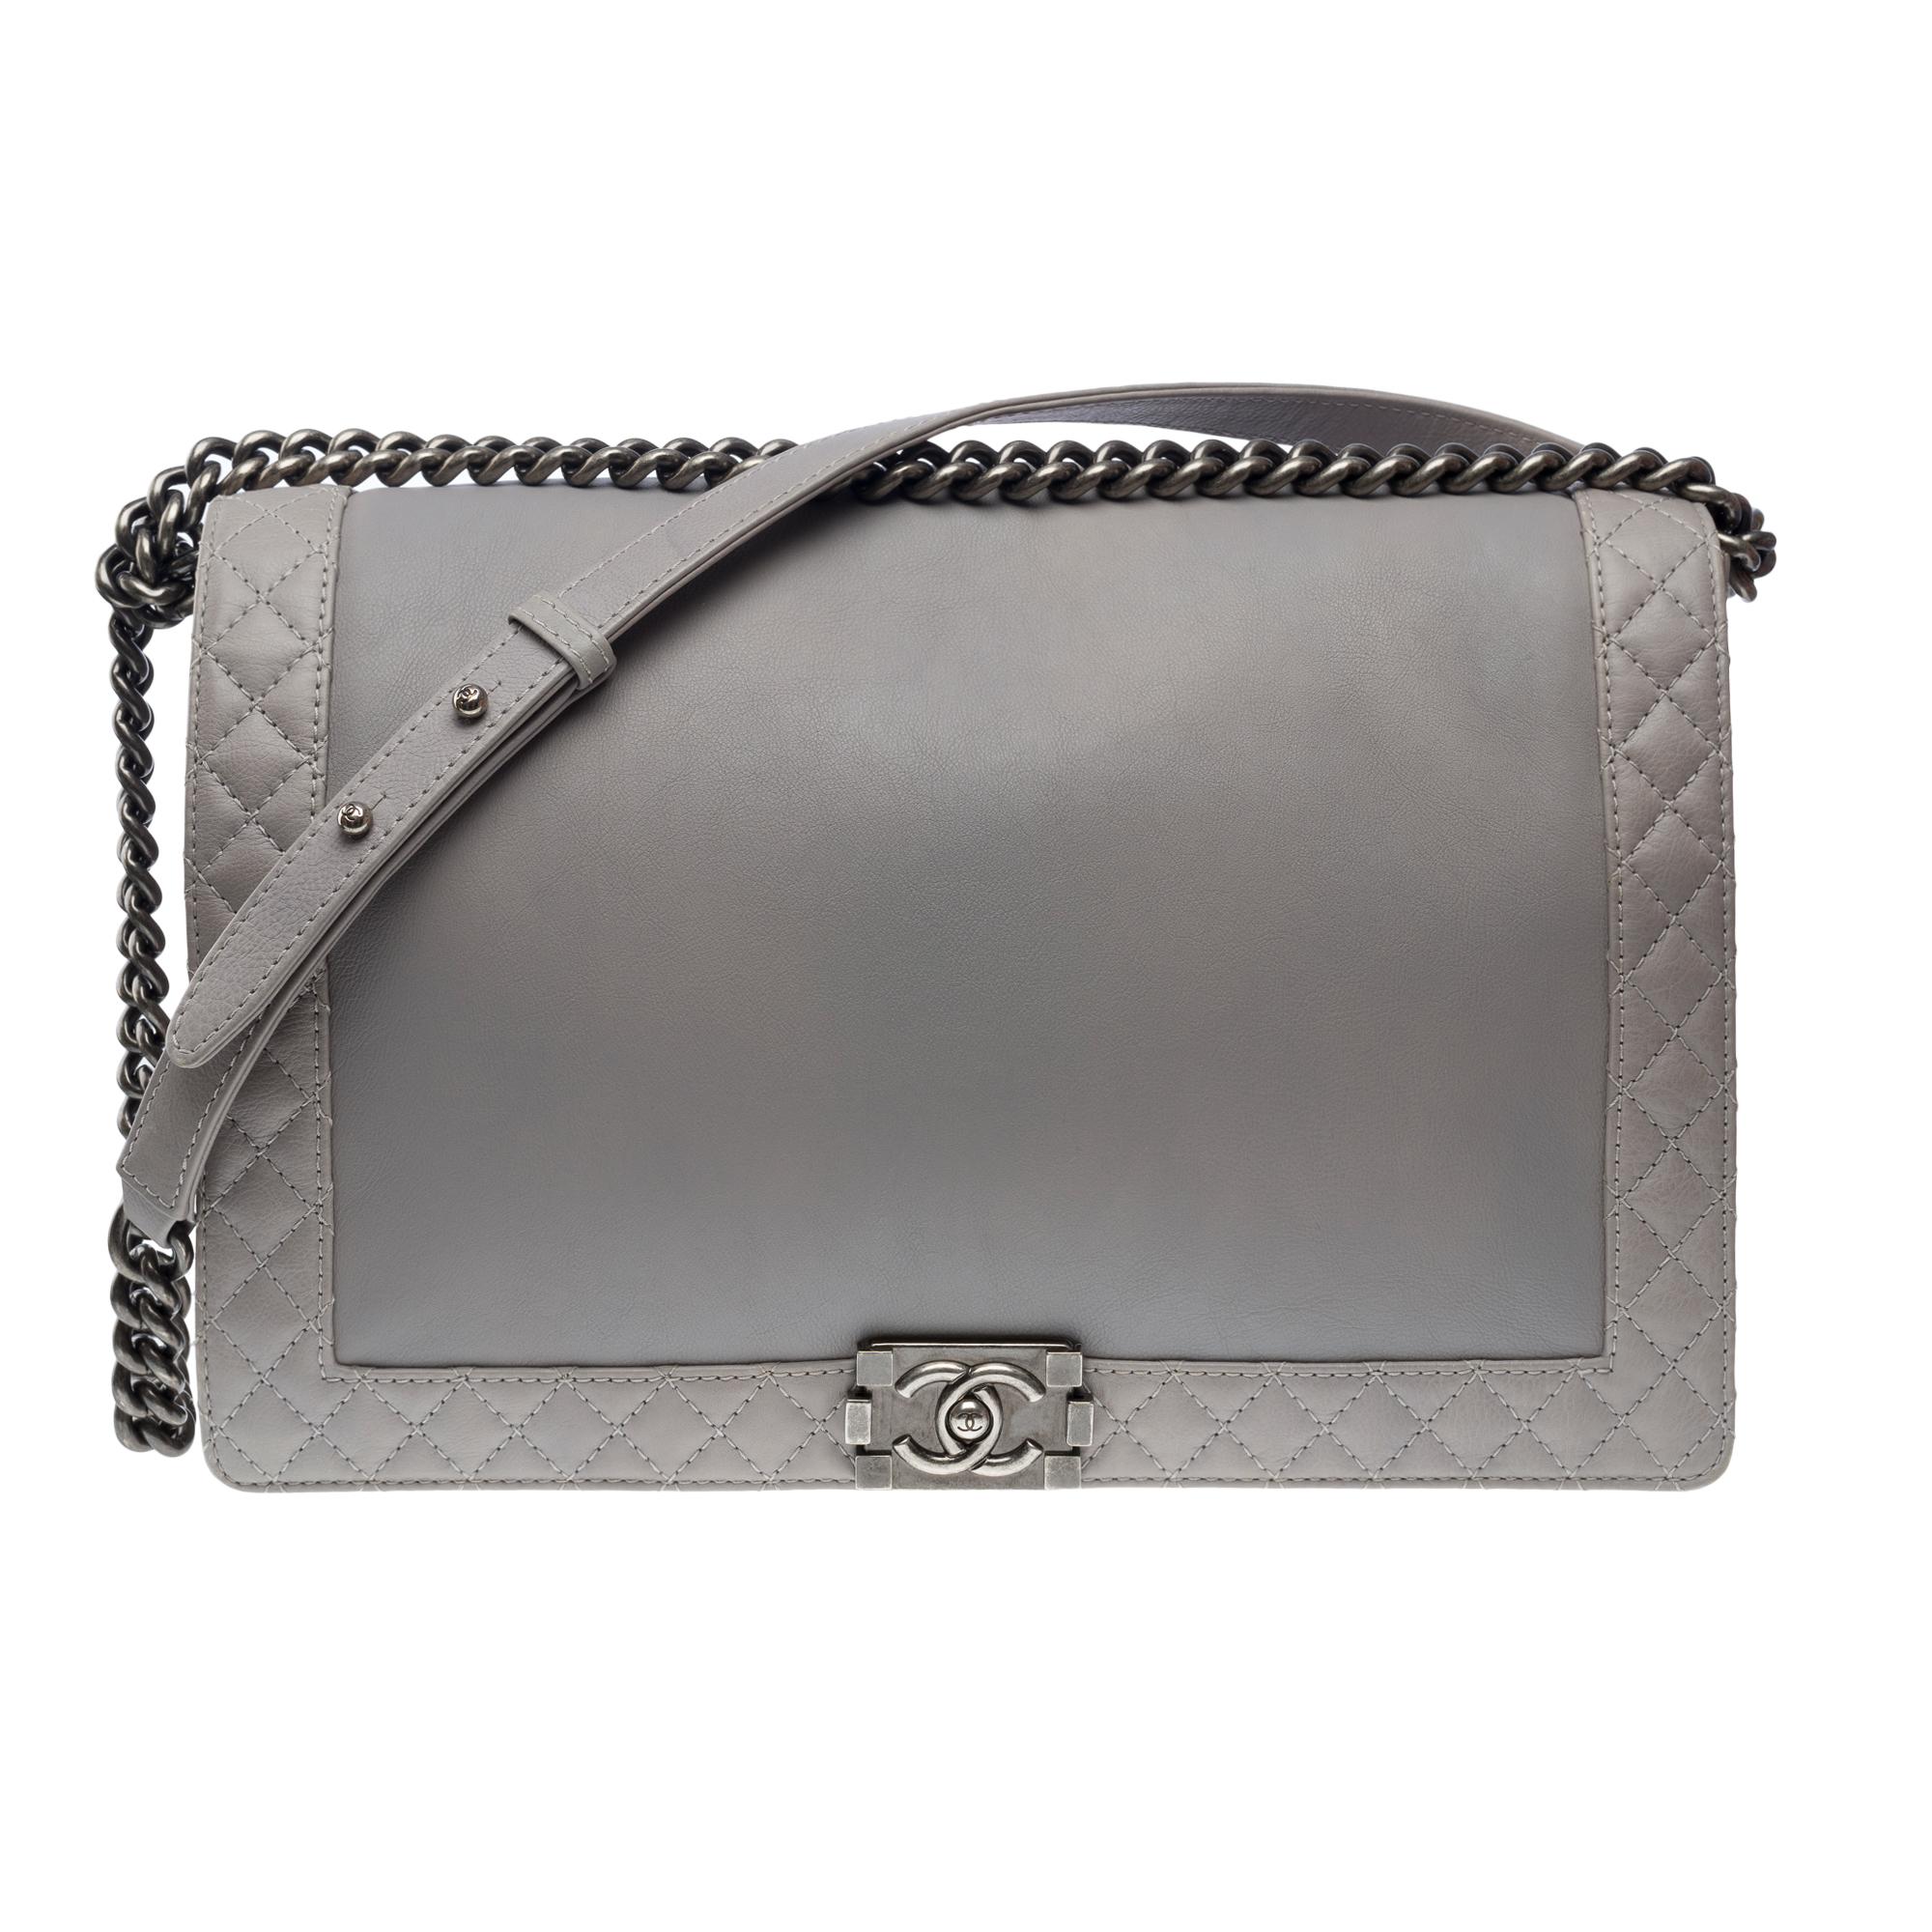 Rare​ ​Chanel​ ​Boy​ ​Reverso​ ​Maxi​ ​Boy​ ​shoulder​ ​bag​ ​in​ ​Grey​ ​soft​ ​calf​ ​leather​ ​partially​ ​quilted​ ​,​ ​ruthenium​ ​metal​ ​trim,​ ​an​ ​adjustable​ ​ruthenium​ ​metal​ ​chain​ ​handle​ ​for​ ​shoulder​ ​or​ ​crossbody​